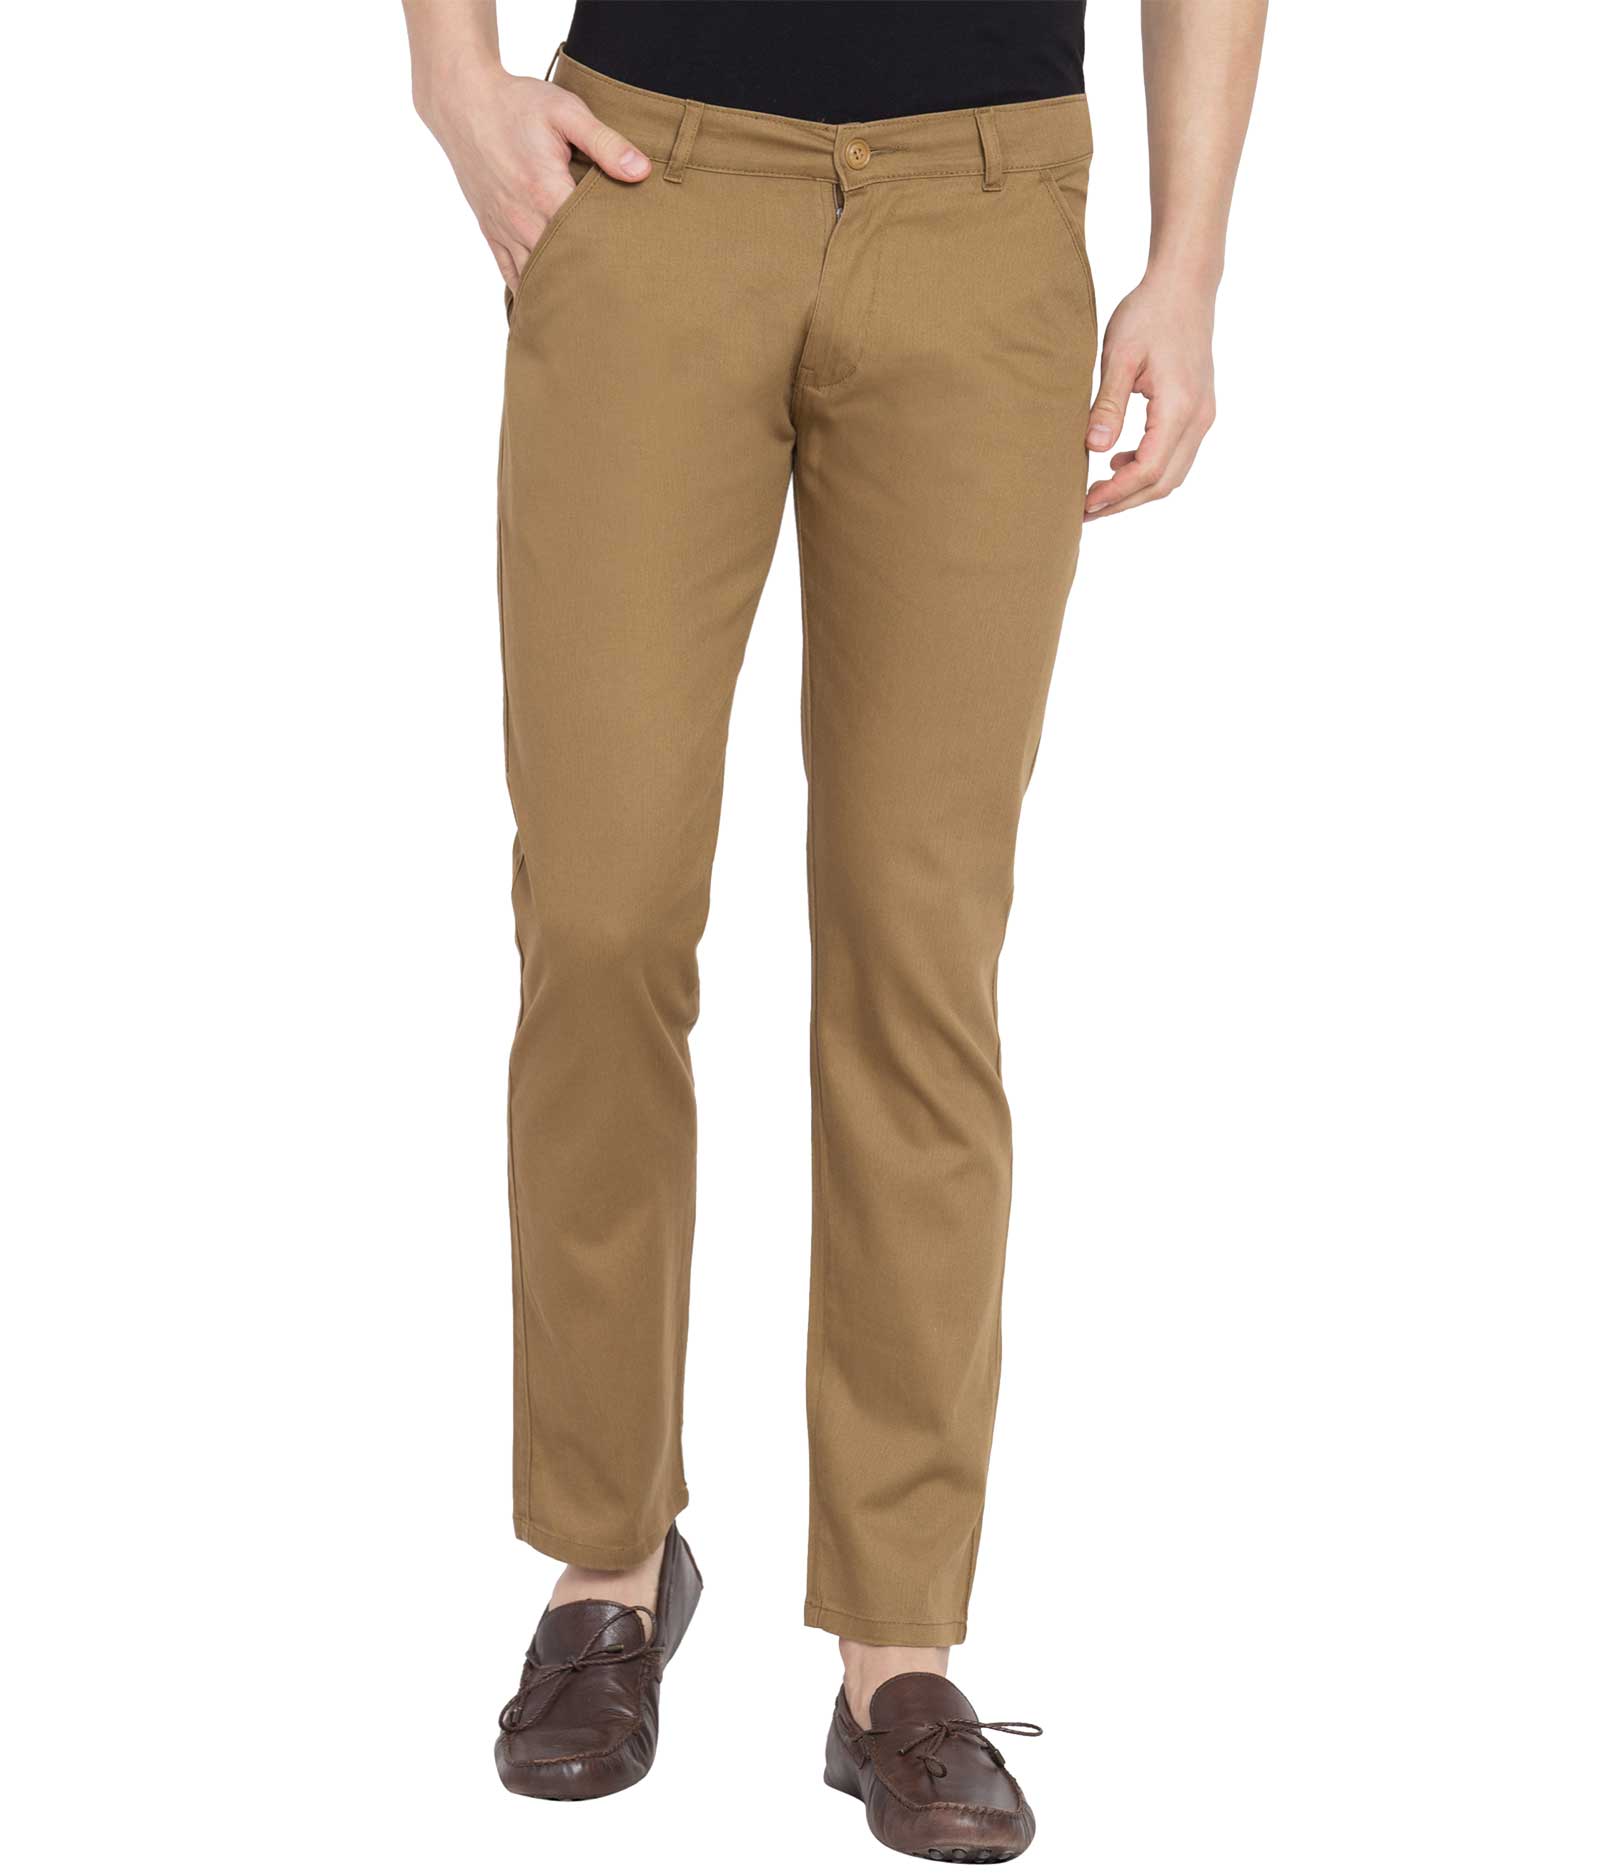 Buy Mens Casual Chinos Trousers Yellow Royal Blue and Black Combo of 3 PV  Cotton for Best Price Reviews Free Shipping